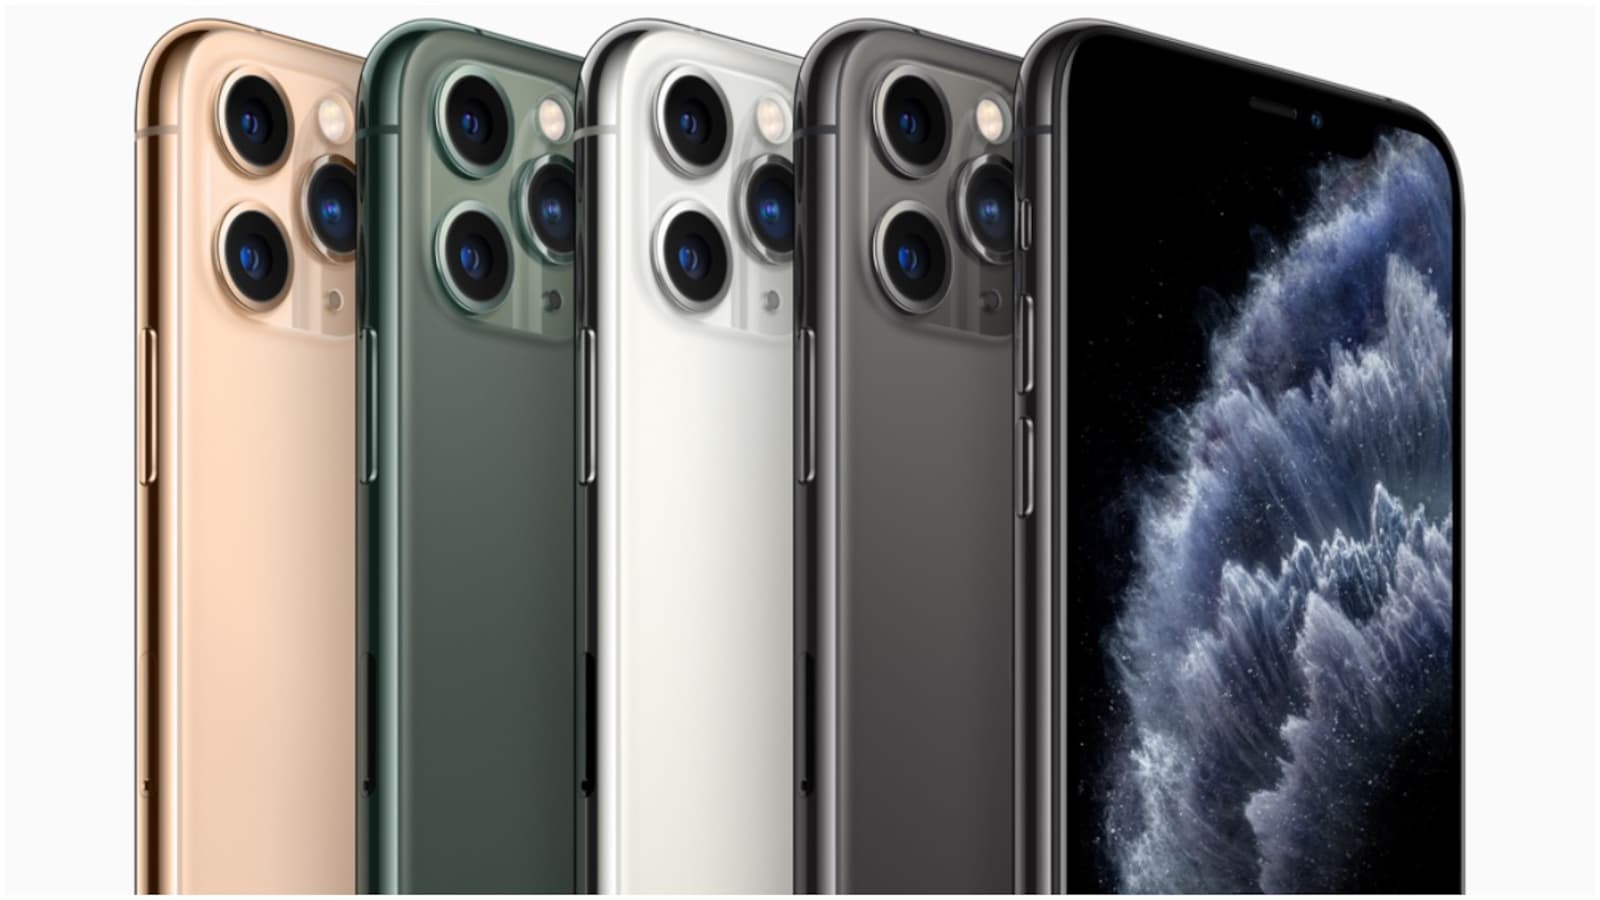 The Apple iPhone 12, Pro, and Max prices tipped, a 5G premium over